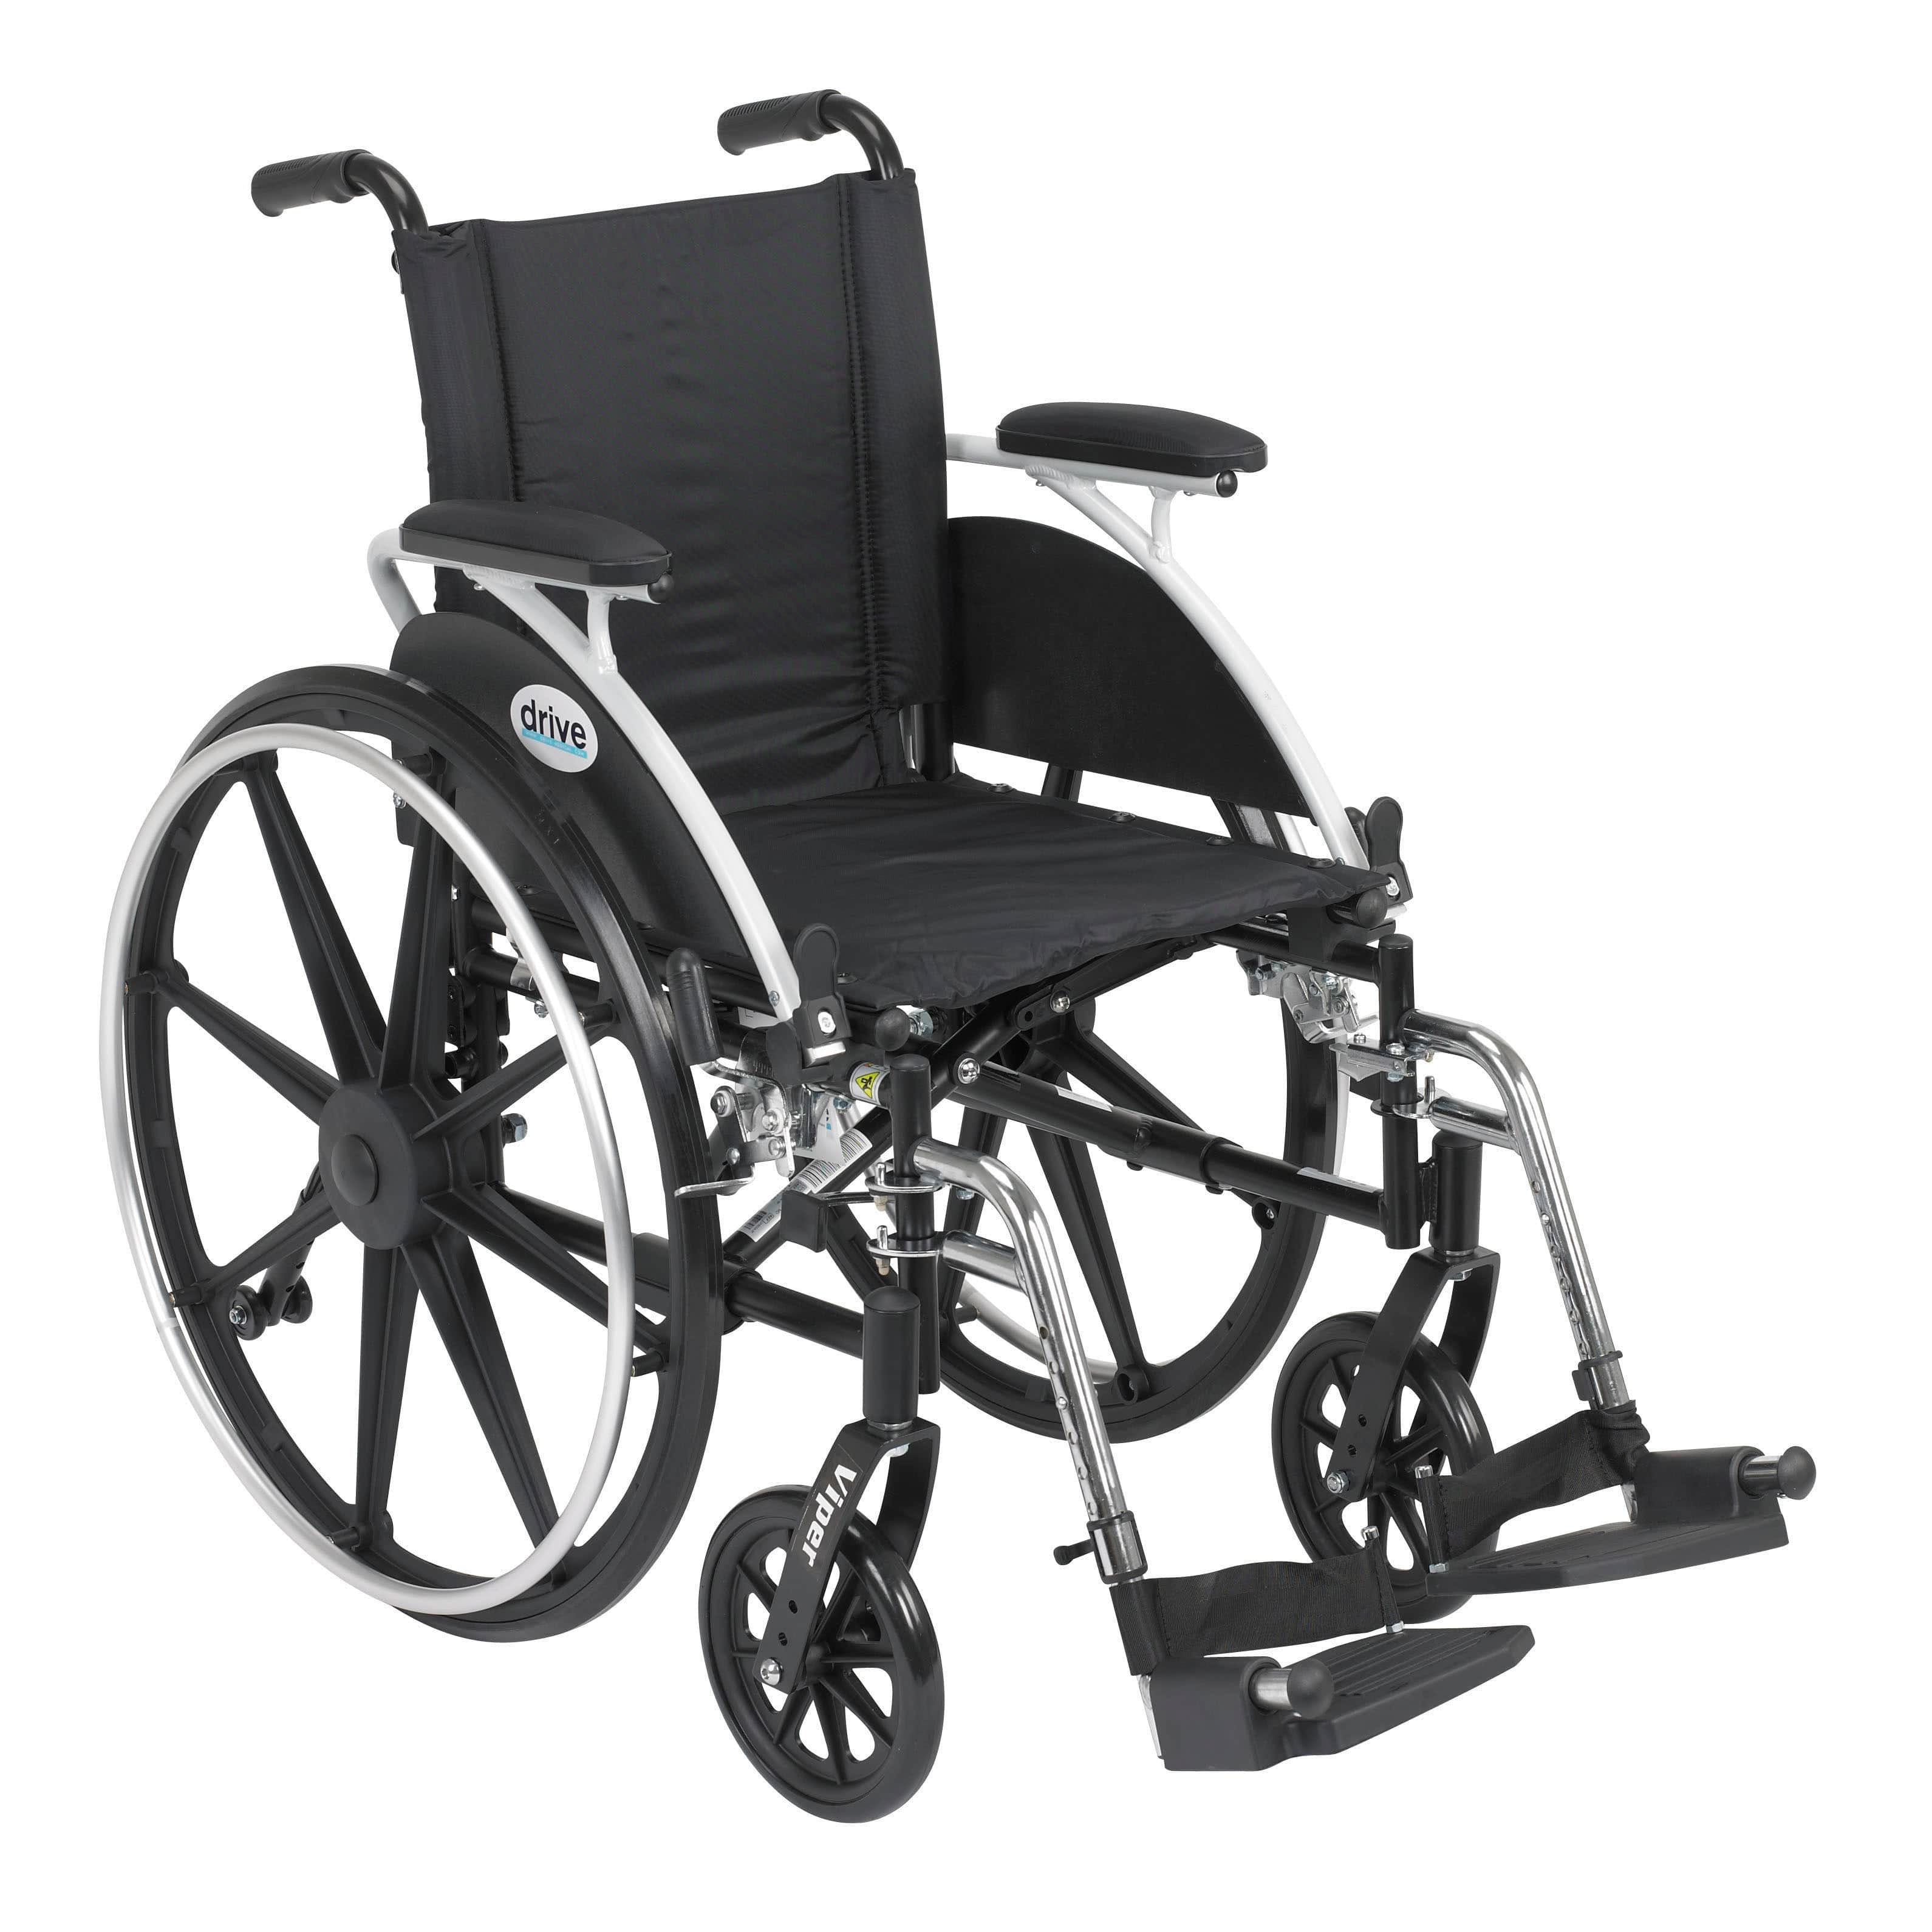 Drive Medical Wheelchairs Flip Back Removable Desk Arms and Swing away Footrests / 14" Seat Drive Medical Viper Wheelchair with Flip Back Removable Arms